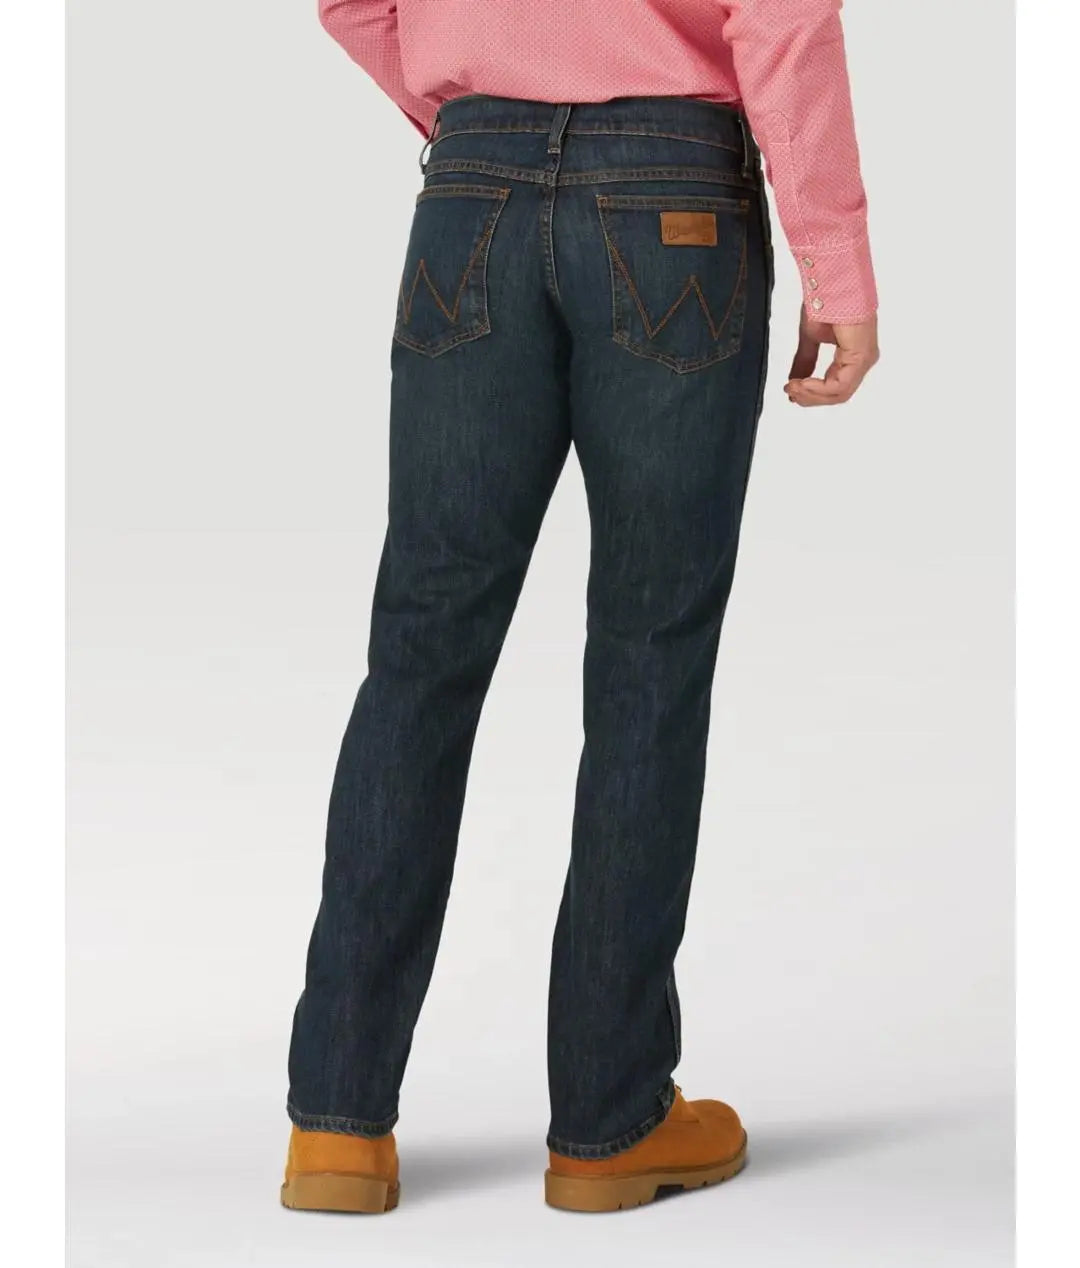 Wrangler - Eagles - FR Flame Resistant Retro Slim Straight Jean - Becker Safety and Supply